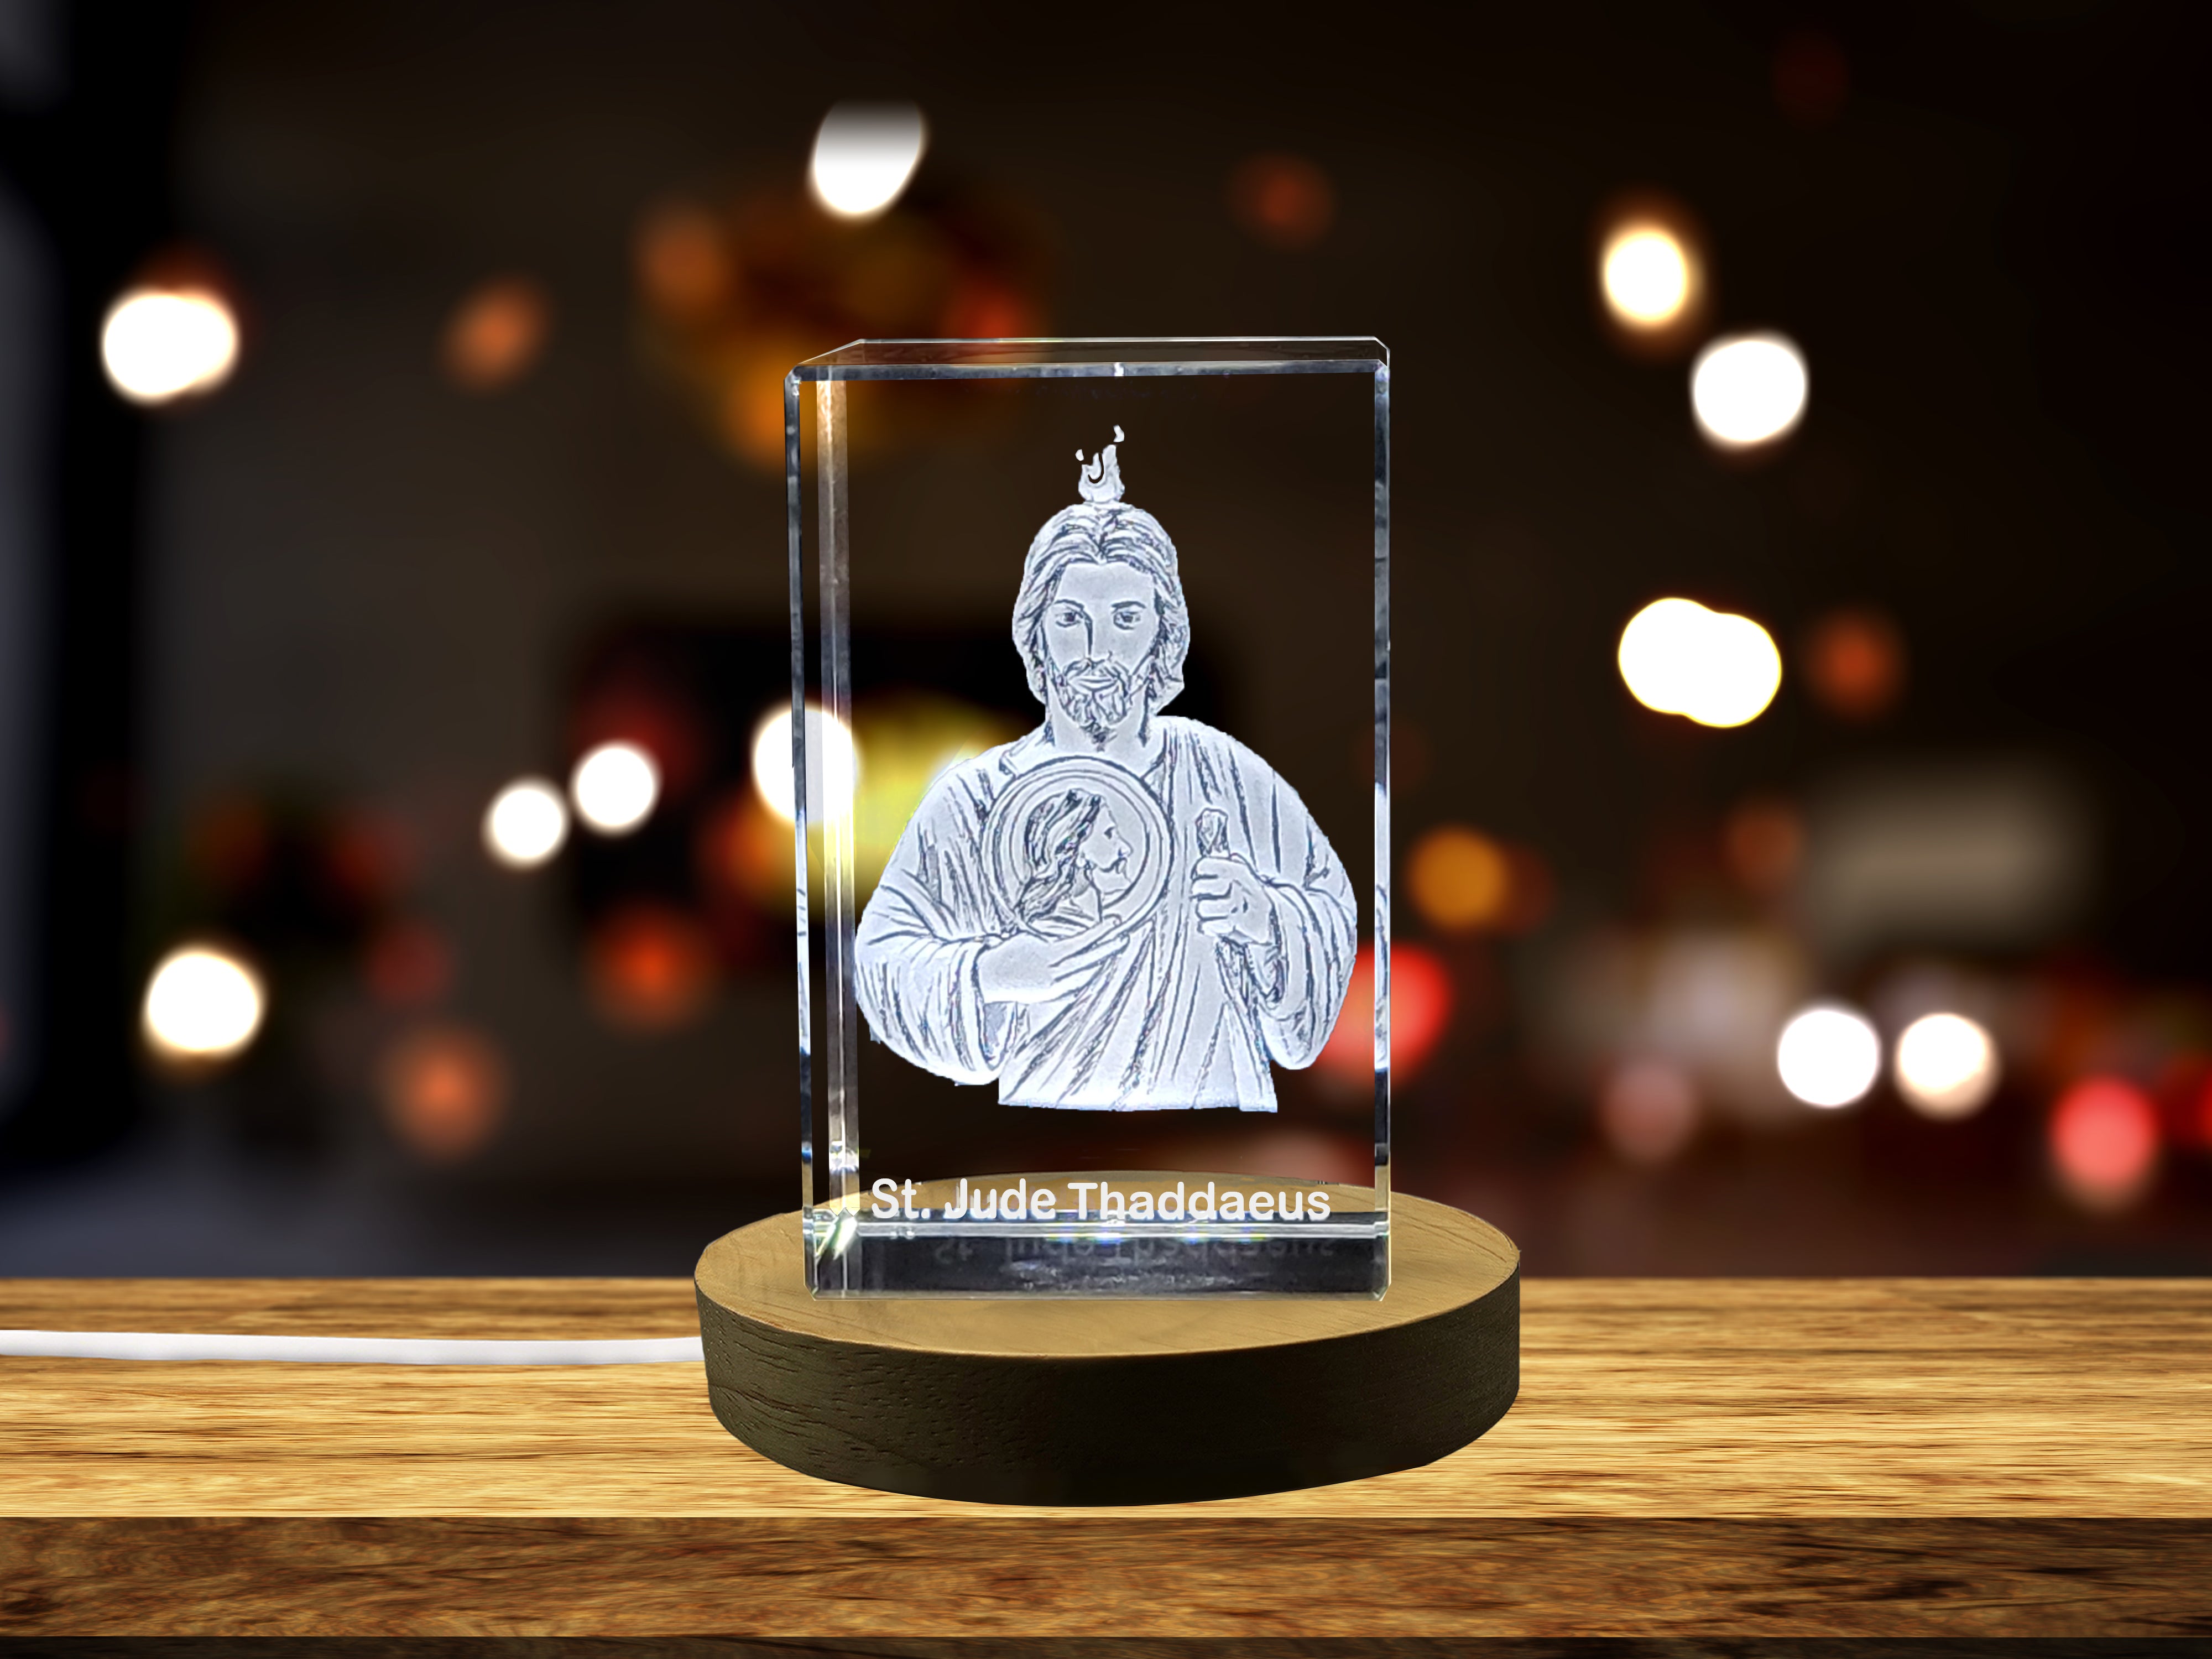 St.Jude Thaddaeus | Saint of Hope Enshrined in Crystal A&B Crystal Collection